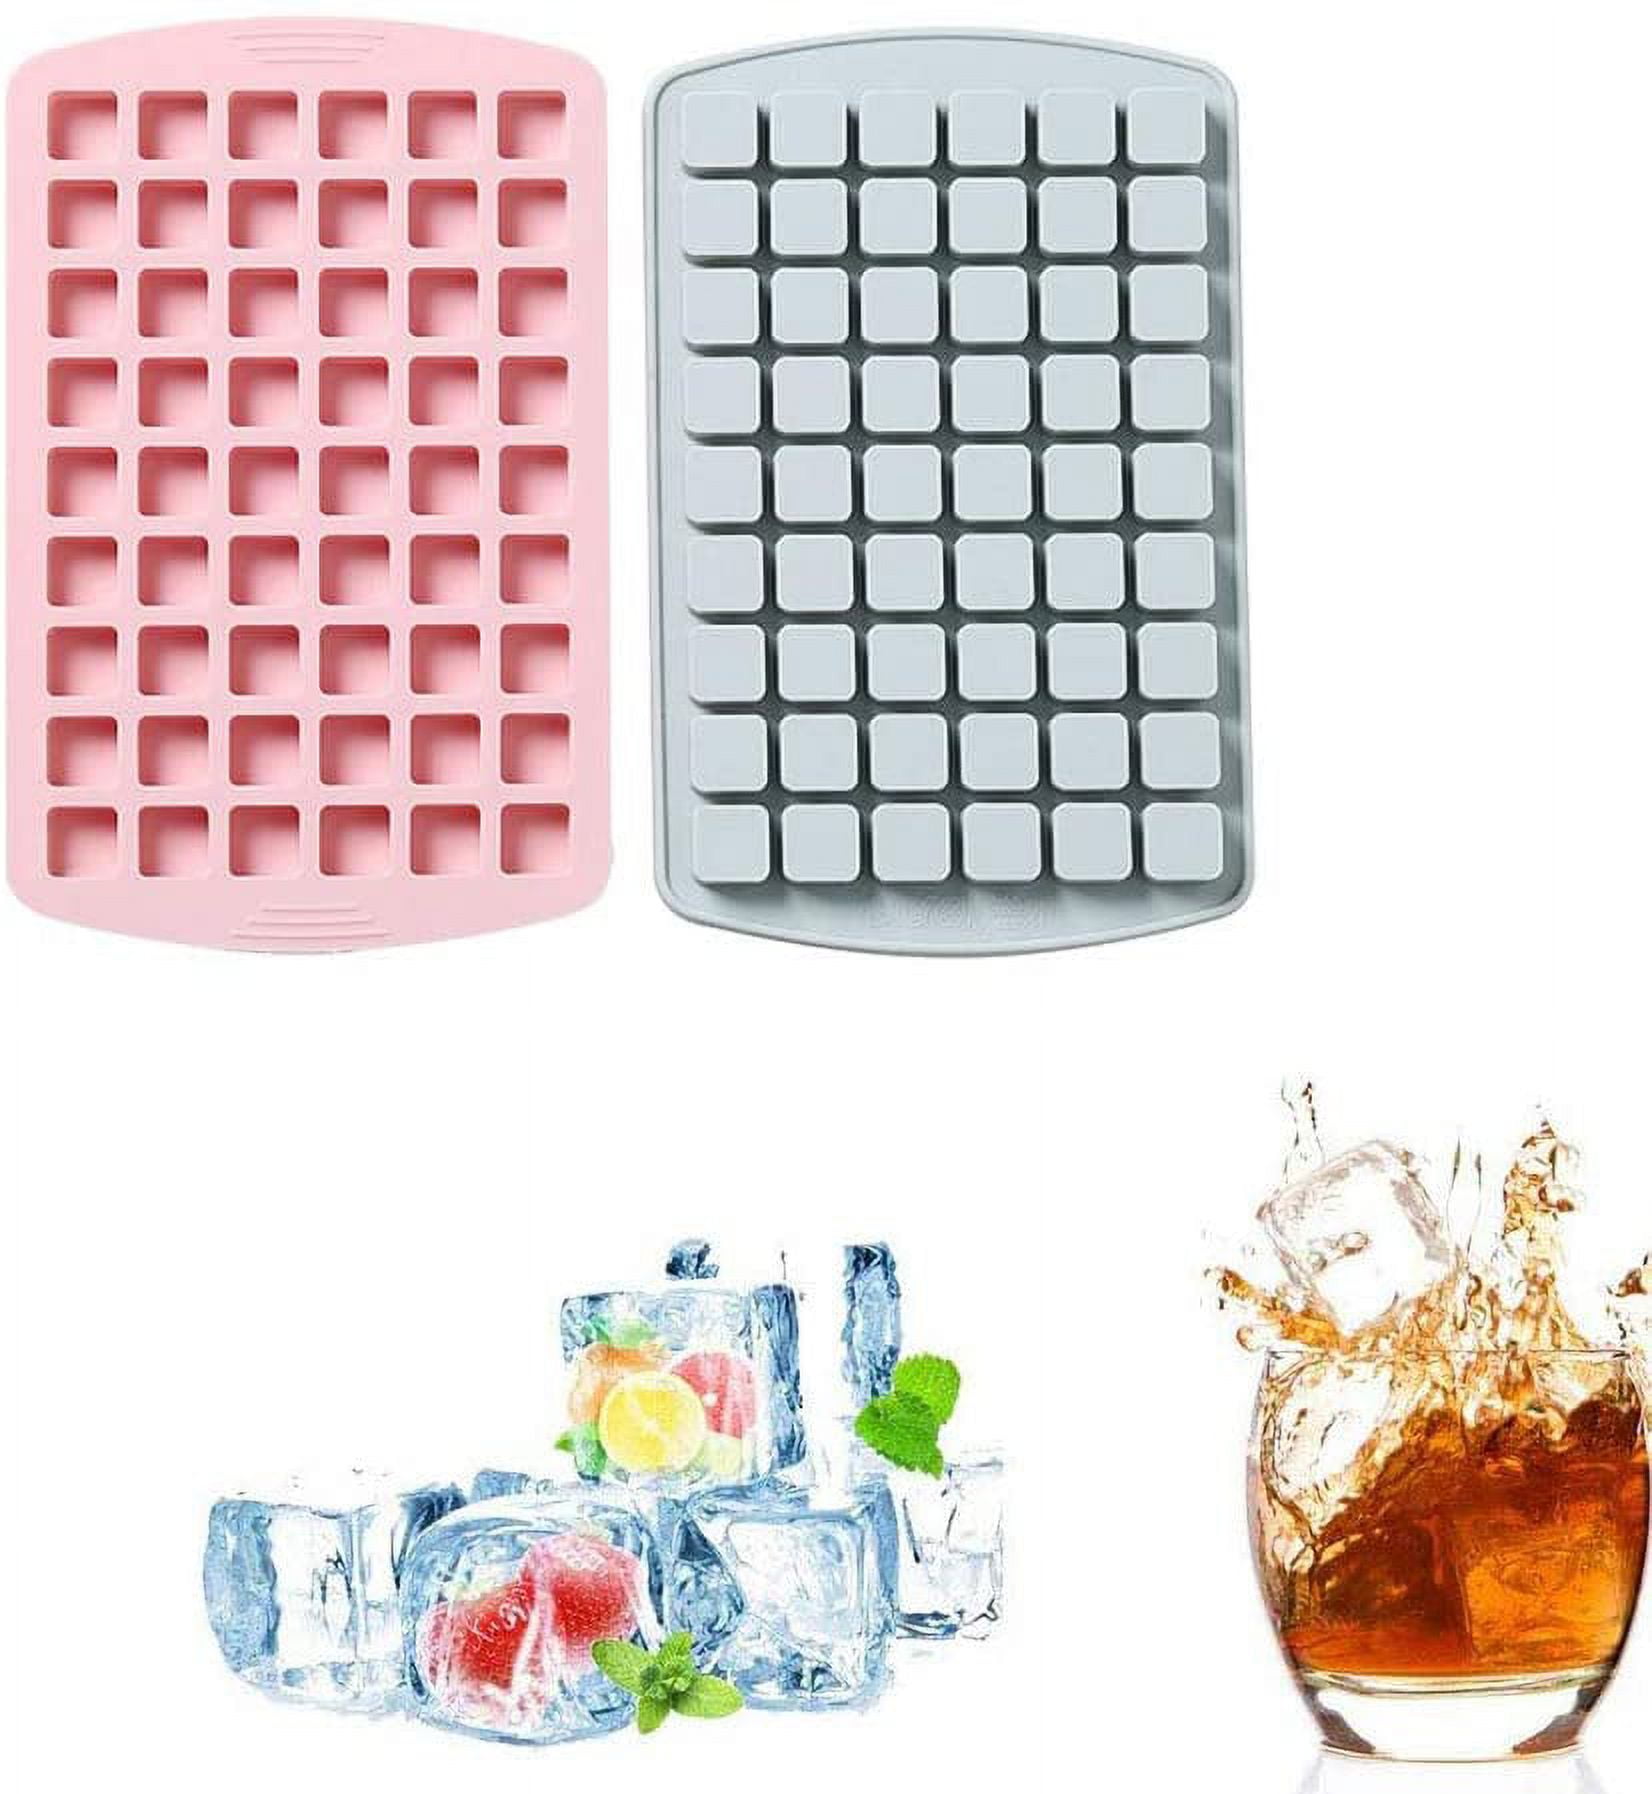 15 Cube Ice Cube Tray - Makes Perfect Cubes in Freezer (4 Trays)